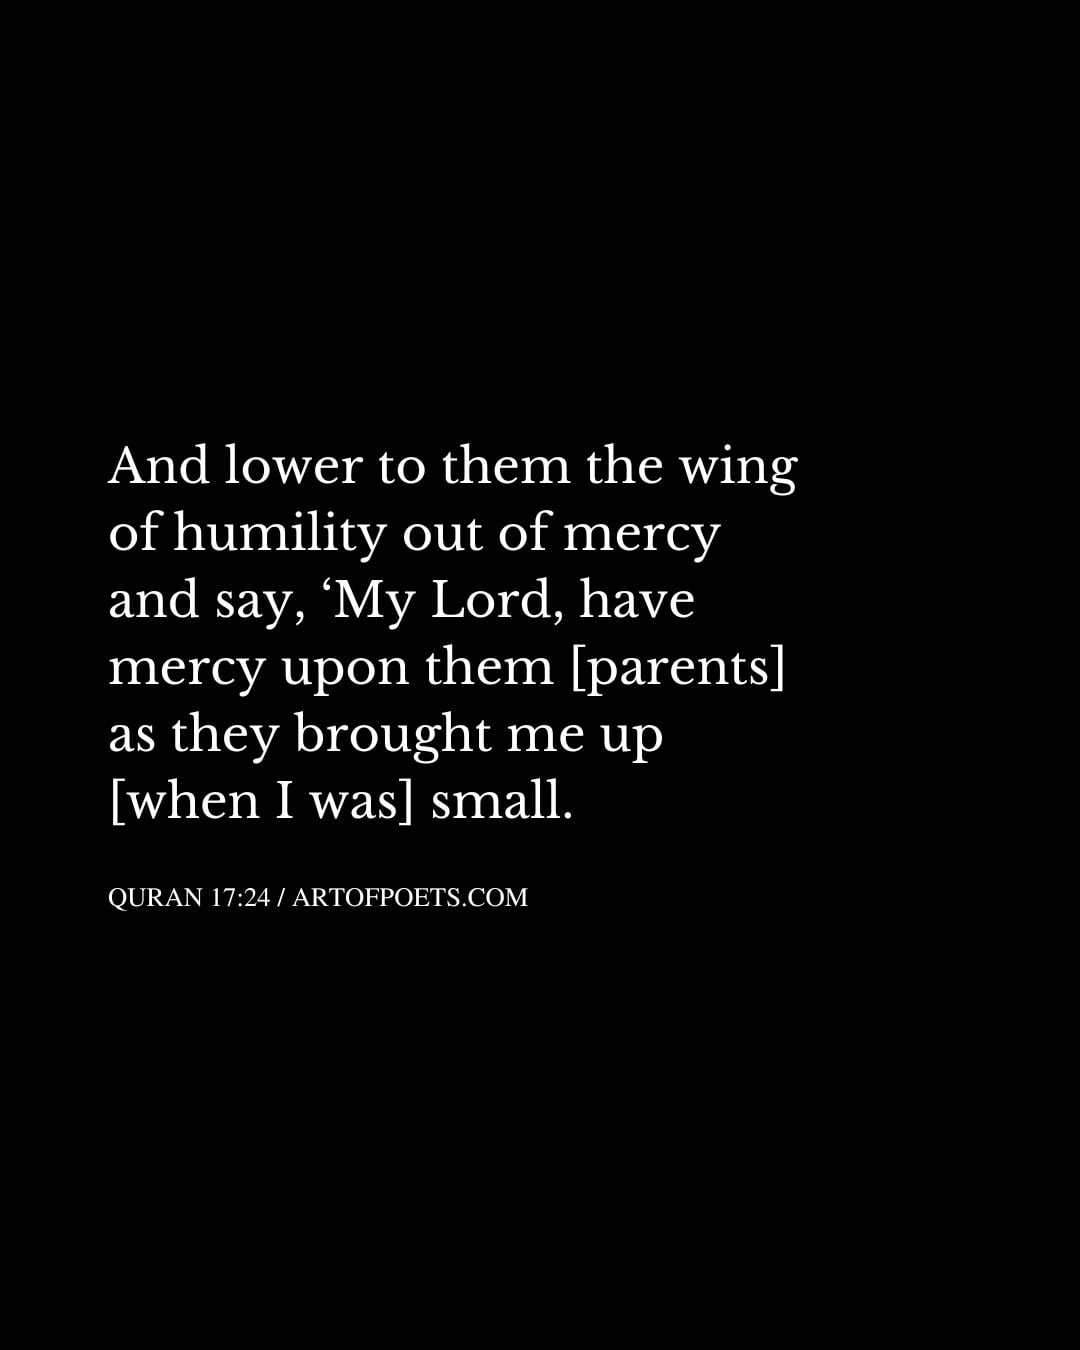 And lower to them the wing of humility out of mercy and say ‘My Lord have mercy upon them parents as they brought me up when I was small